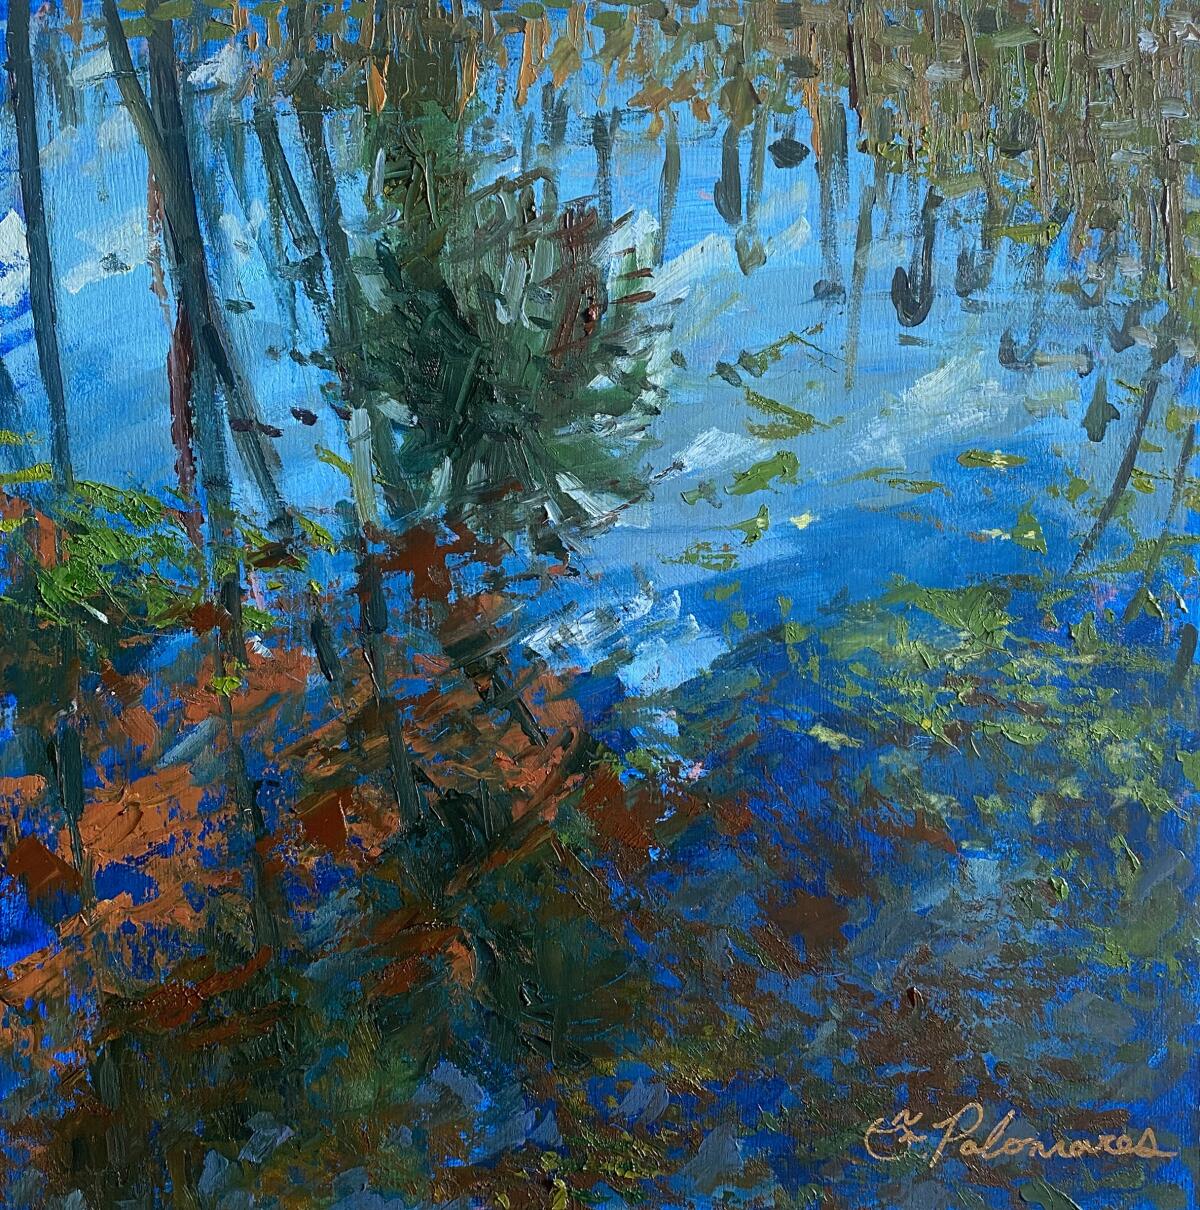 "Echo Park 2020" is a painting of treetops reflected in the water of the L.A. lake. 